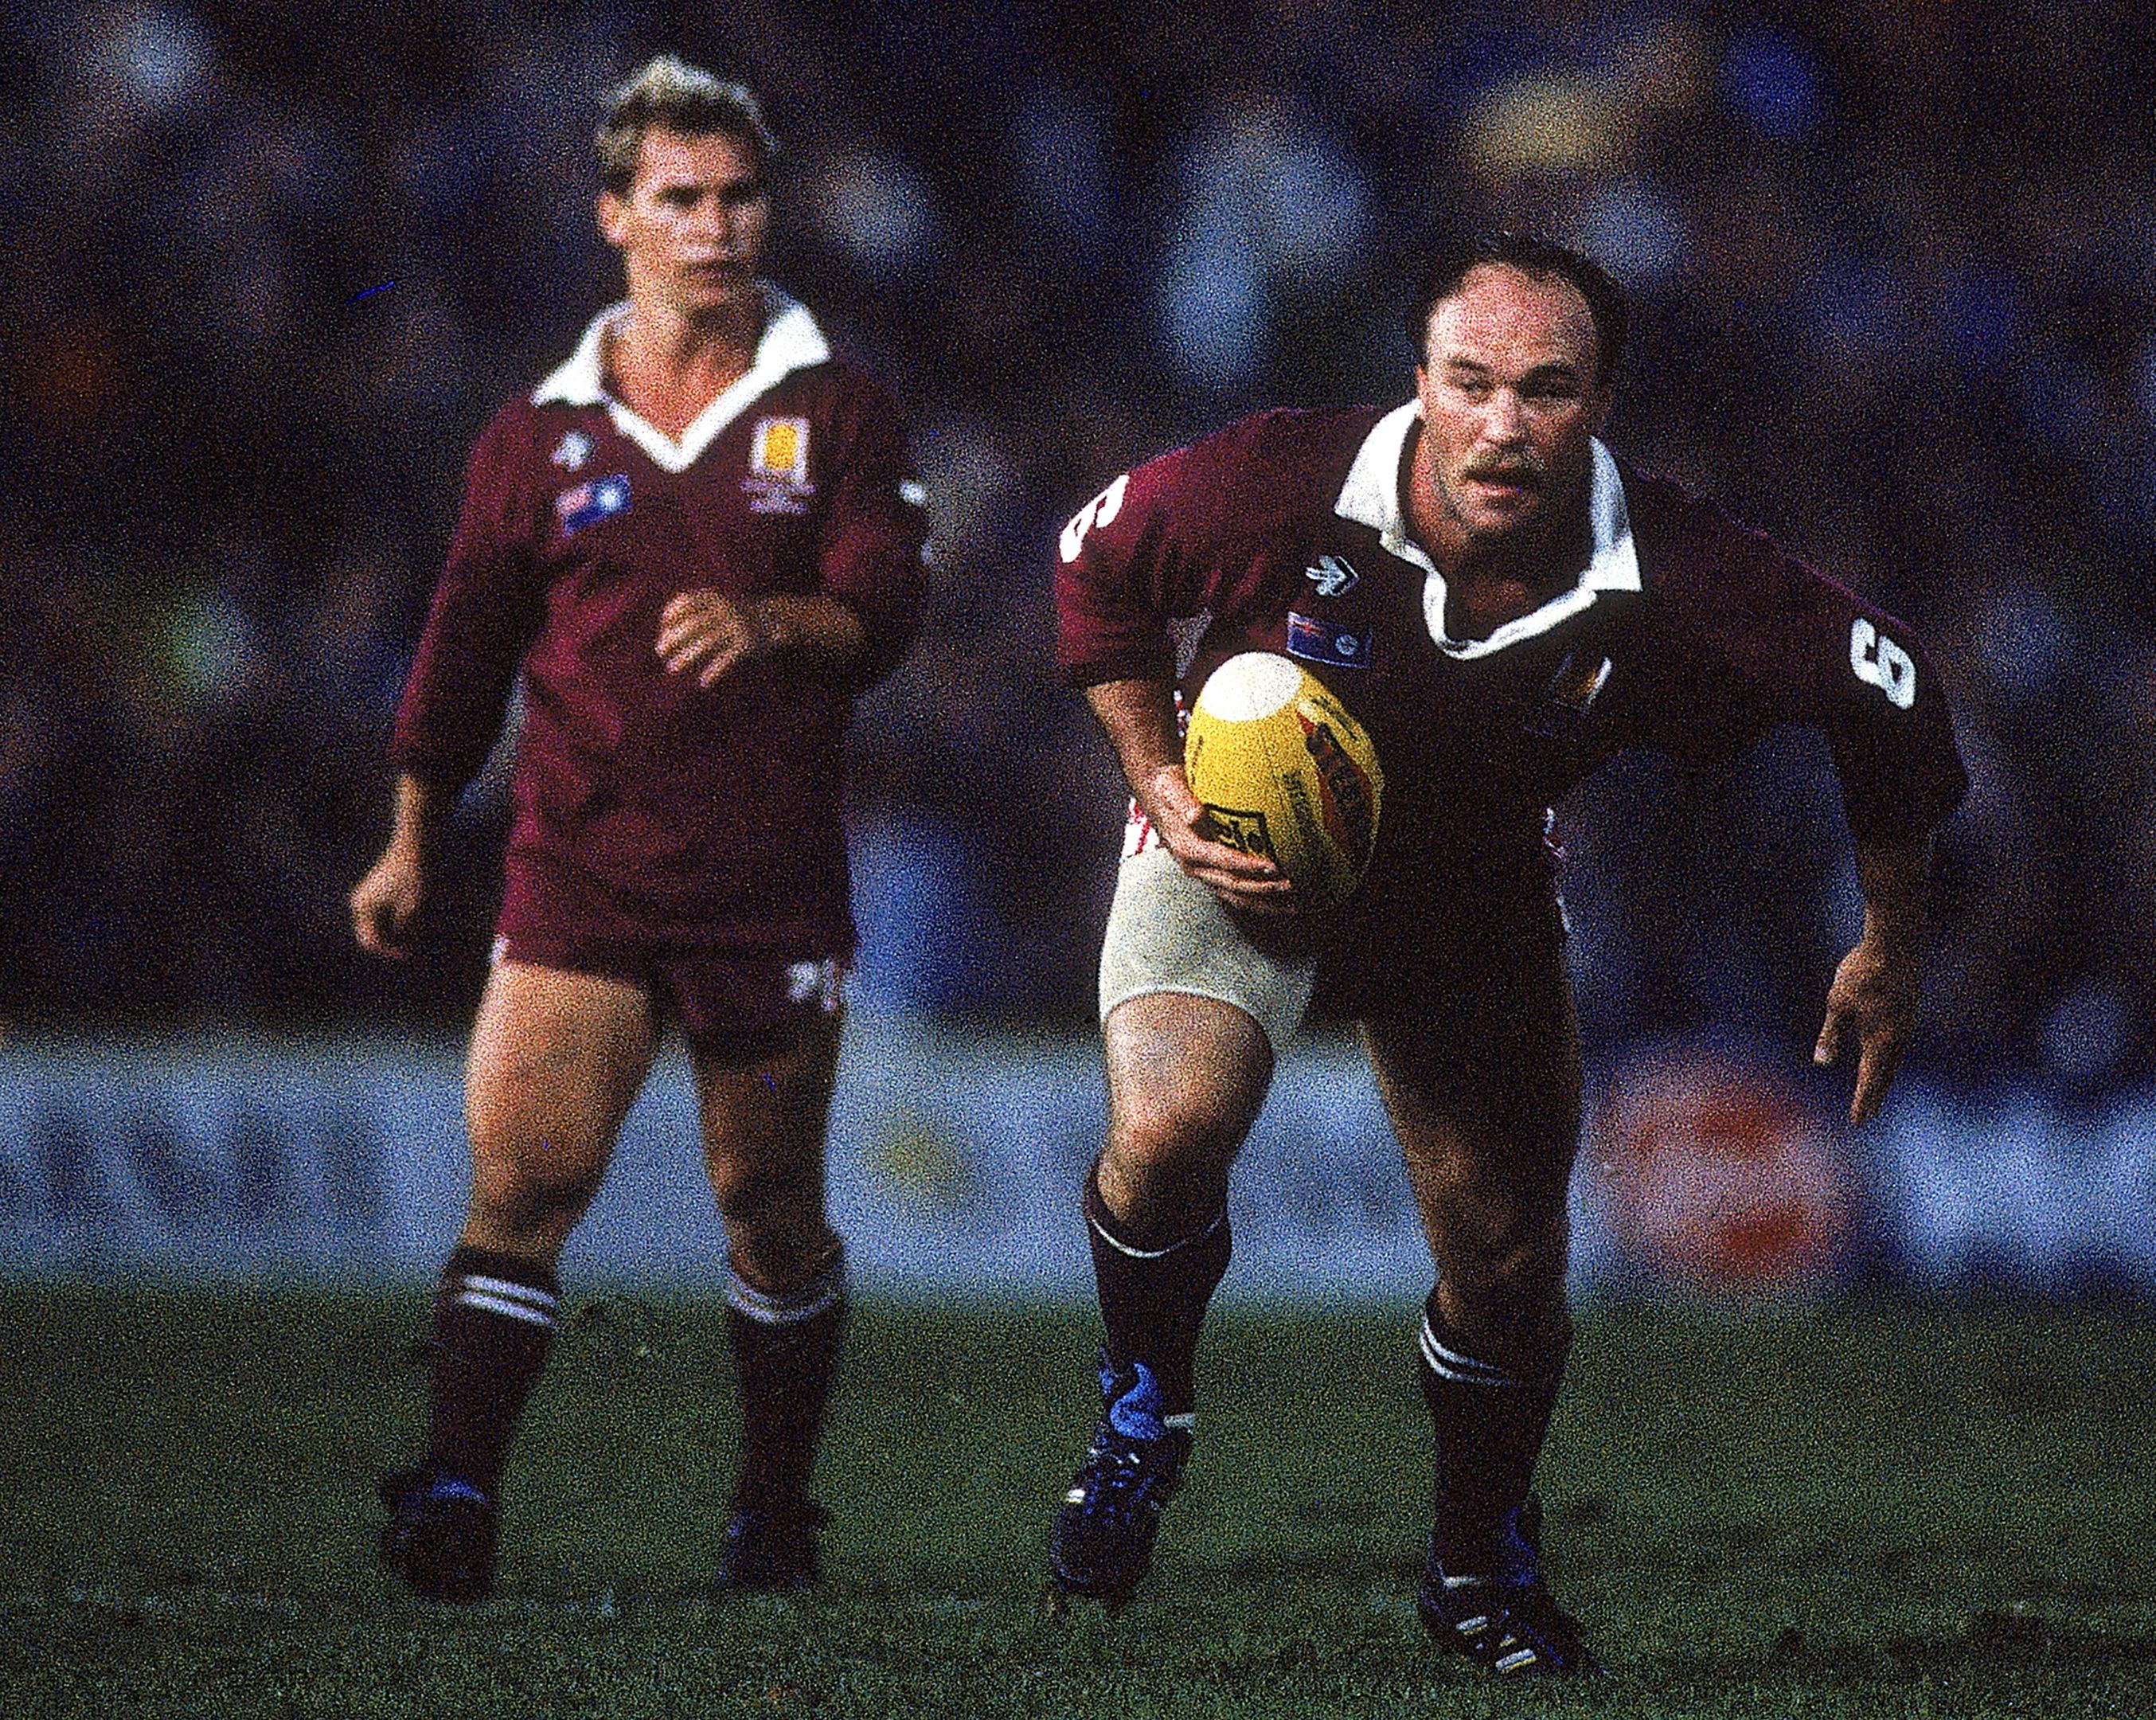 Wally Lewis calls for ban on tackling during training as Immortal delivers dire warning